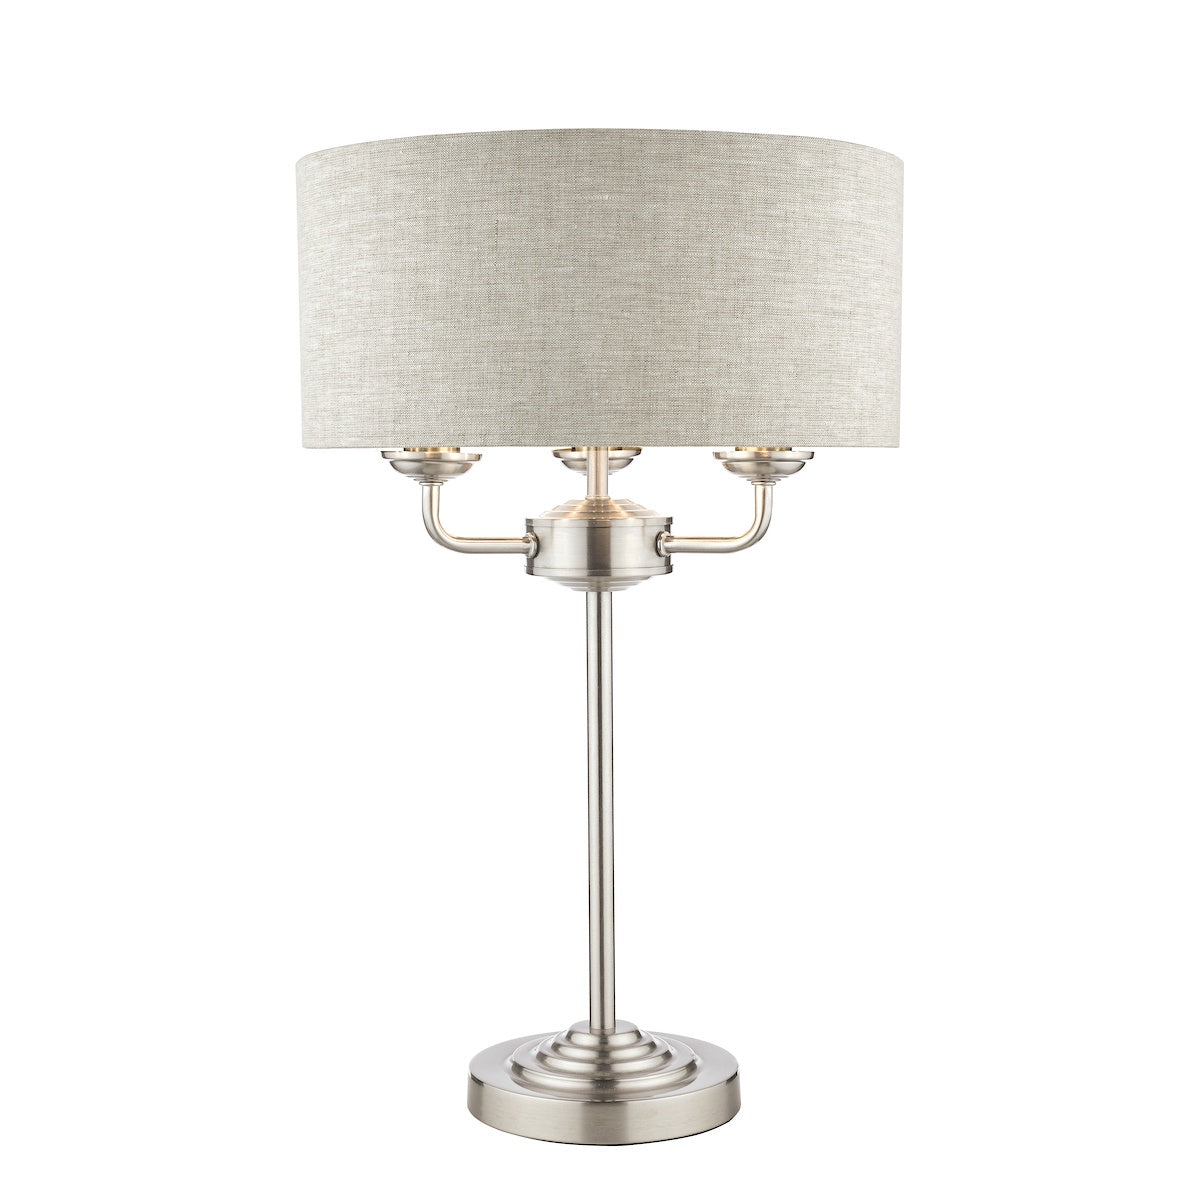 Laura Ashley Sorrento Brushed Chrome LA3636753-Q 3 Light Table Lamp with Natural Shade